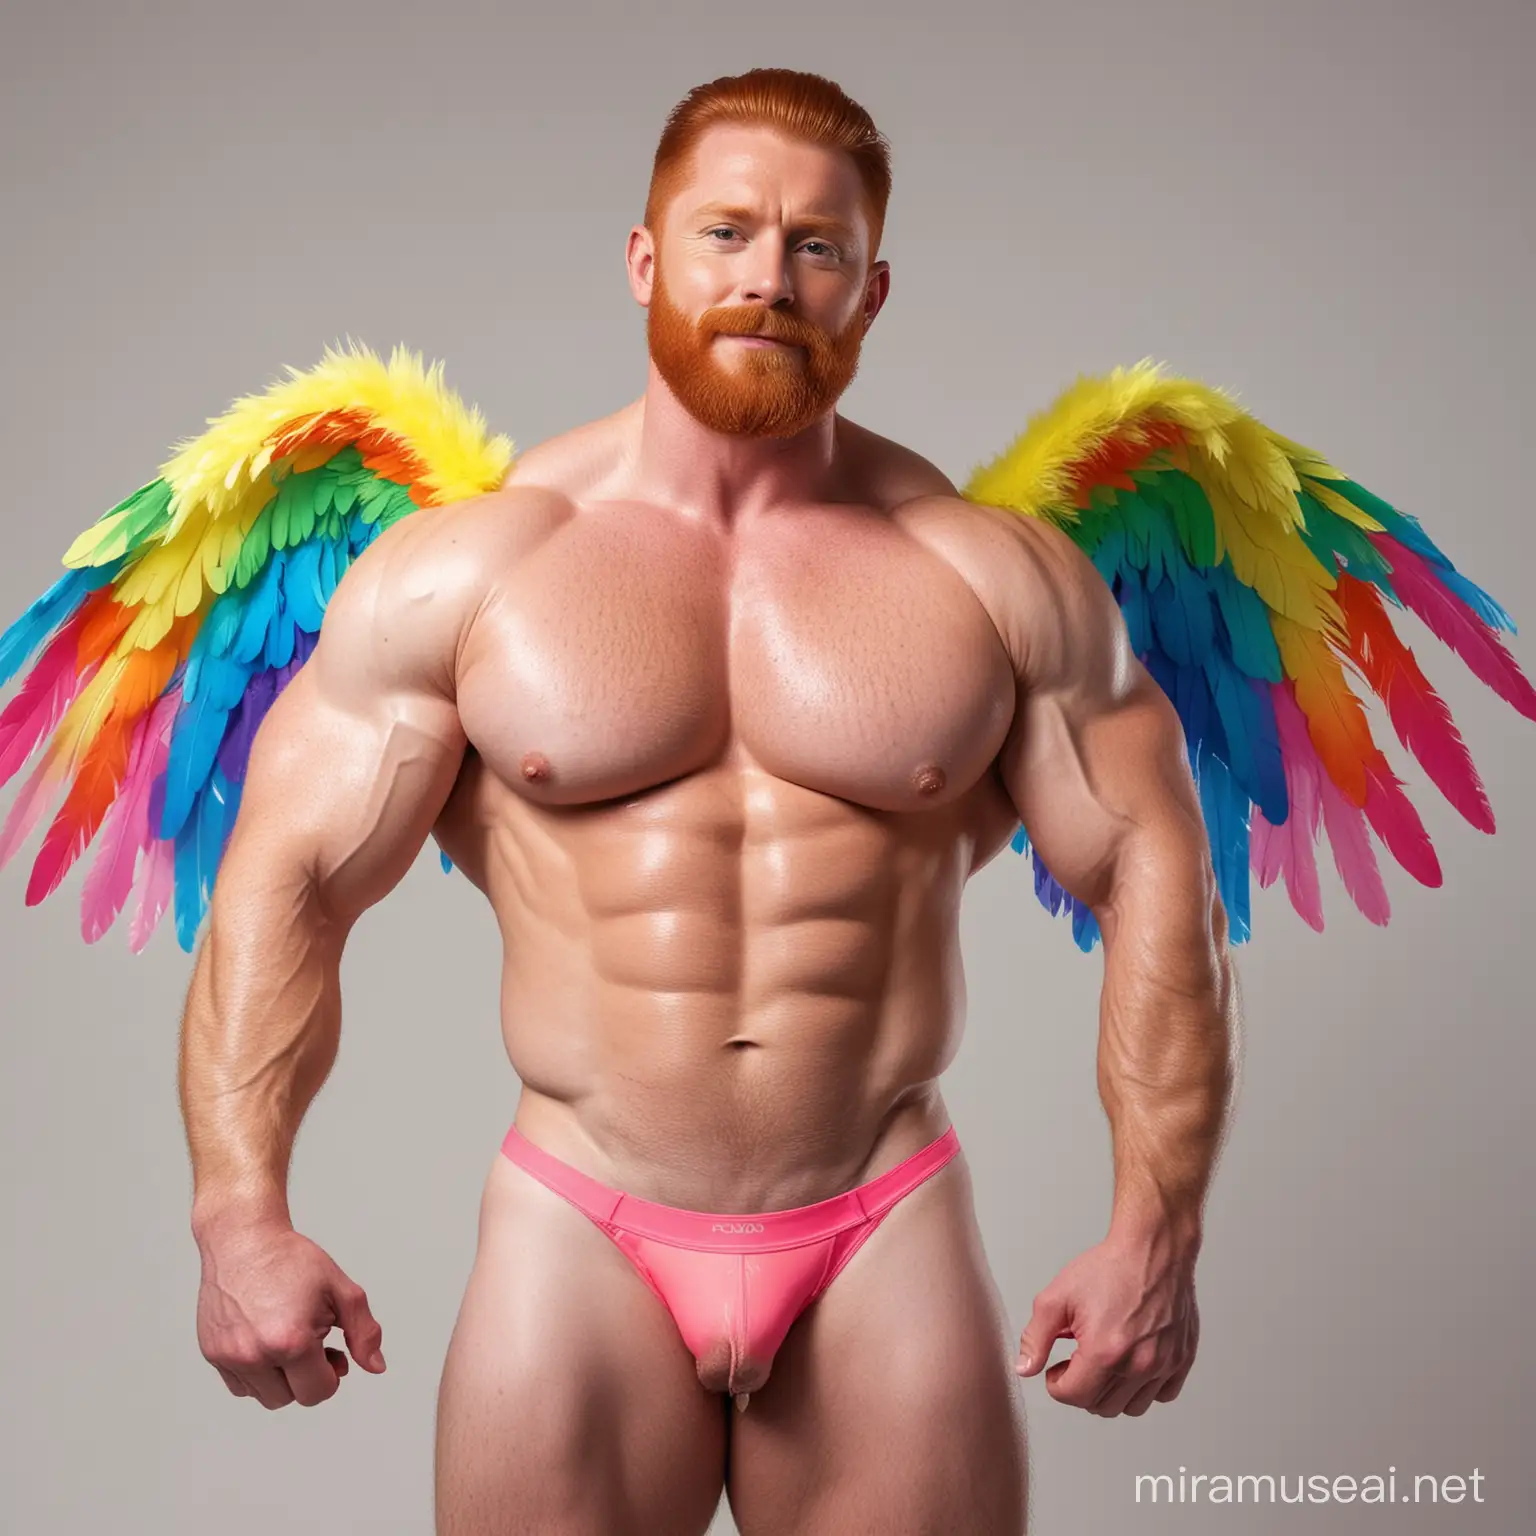 Topless 30s Thick Beefy Redhead IFBB Bodybuilder Beard Daddy wearing Multi-Highlighter Bright Rainbow Coloured See Through Jacket with Eagle wings and Flexing Big Strong Arm with doraemon